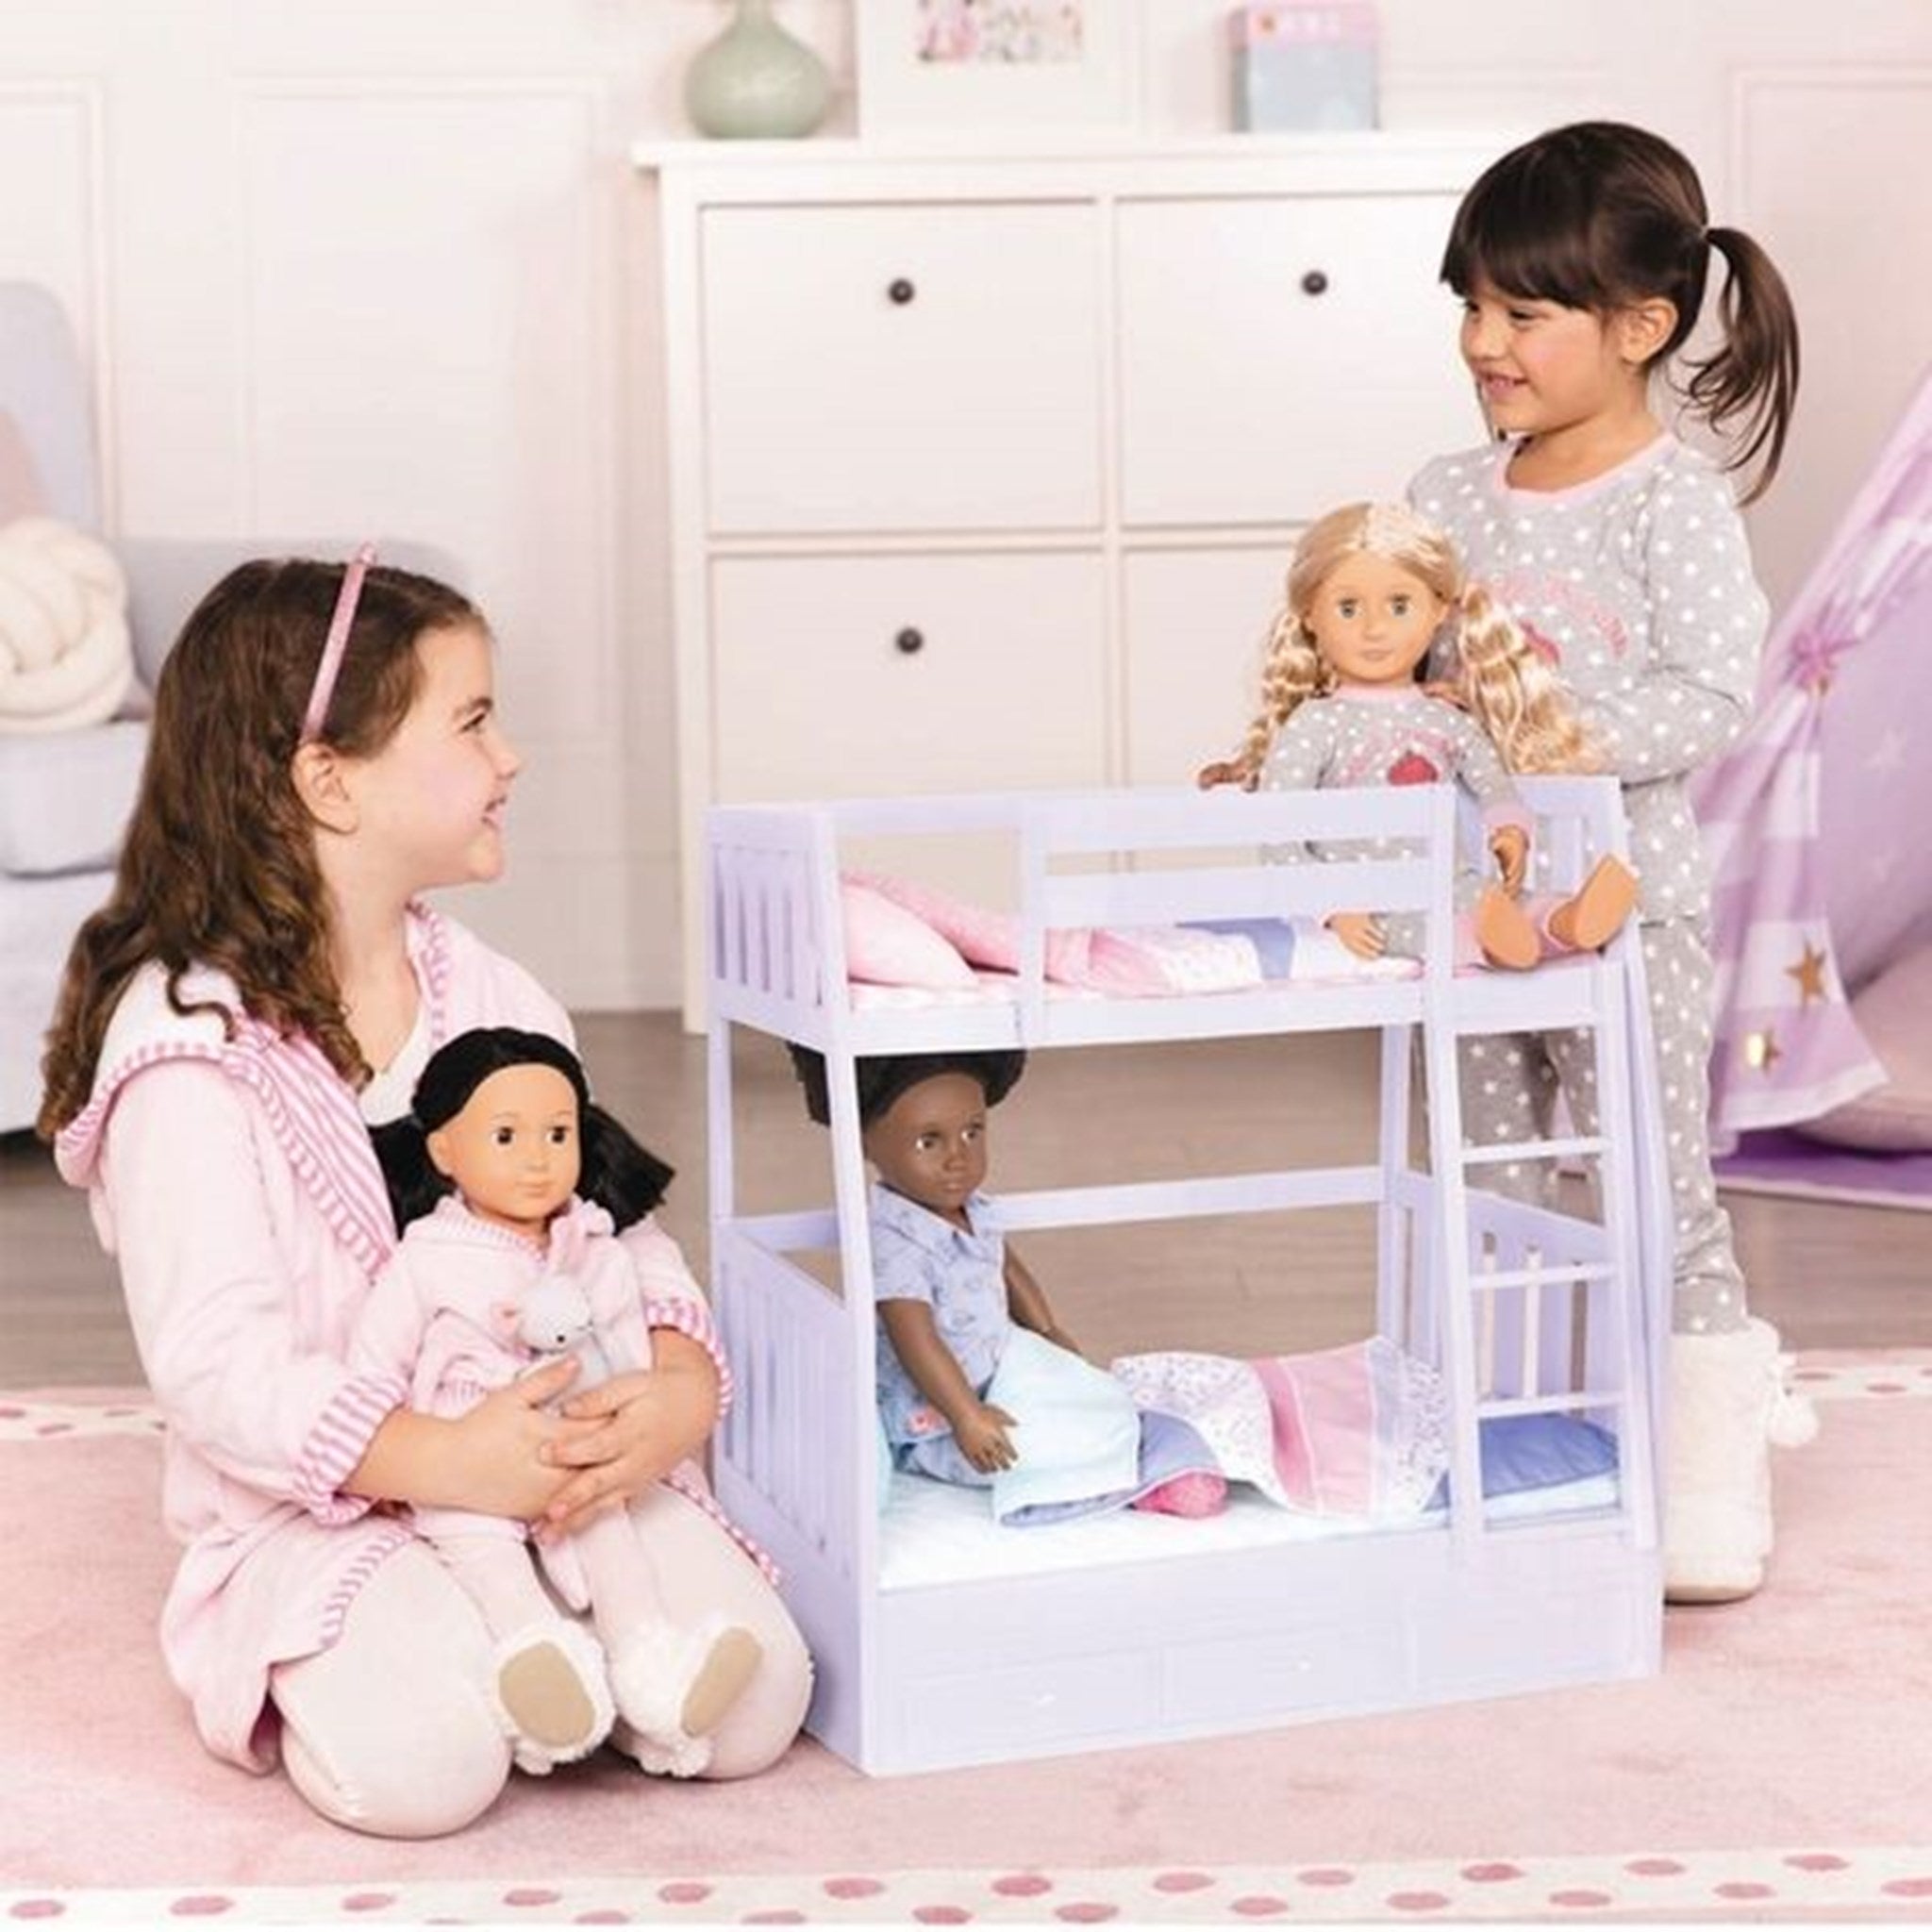 Our Generation Bunk Bed 2